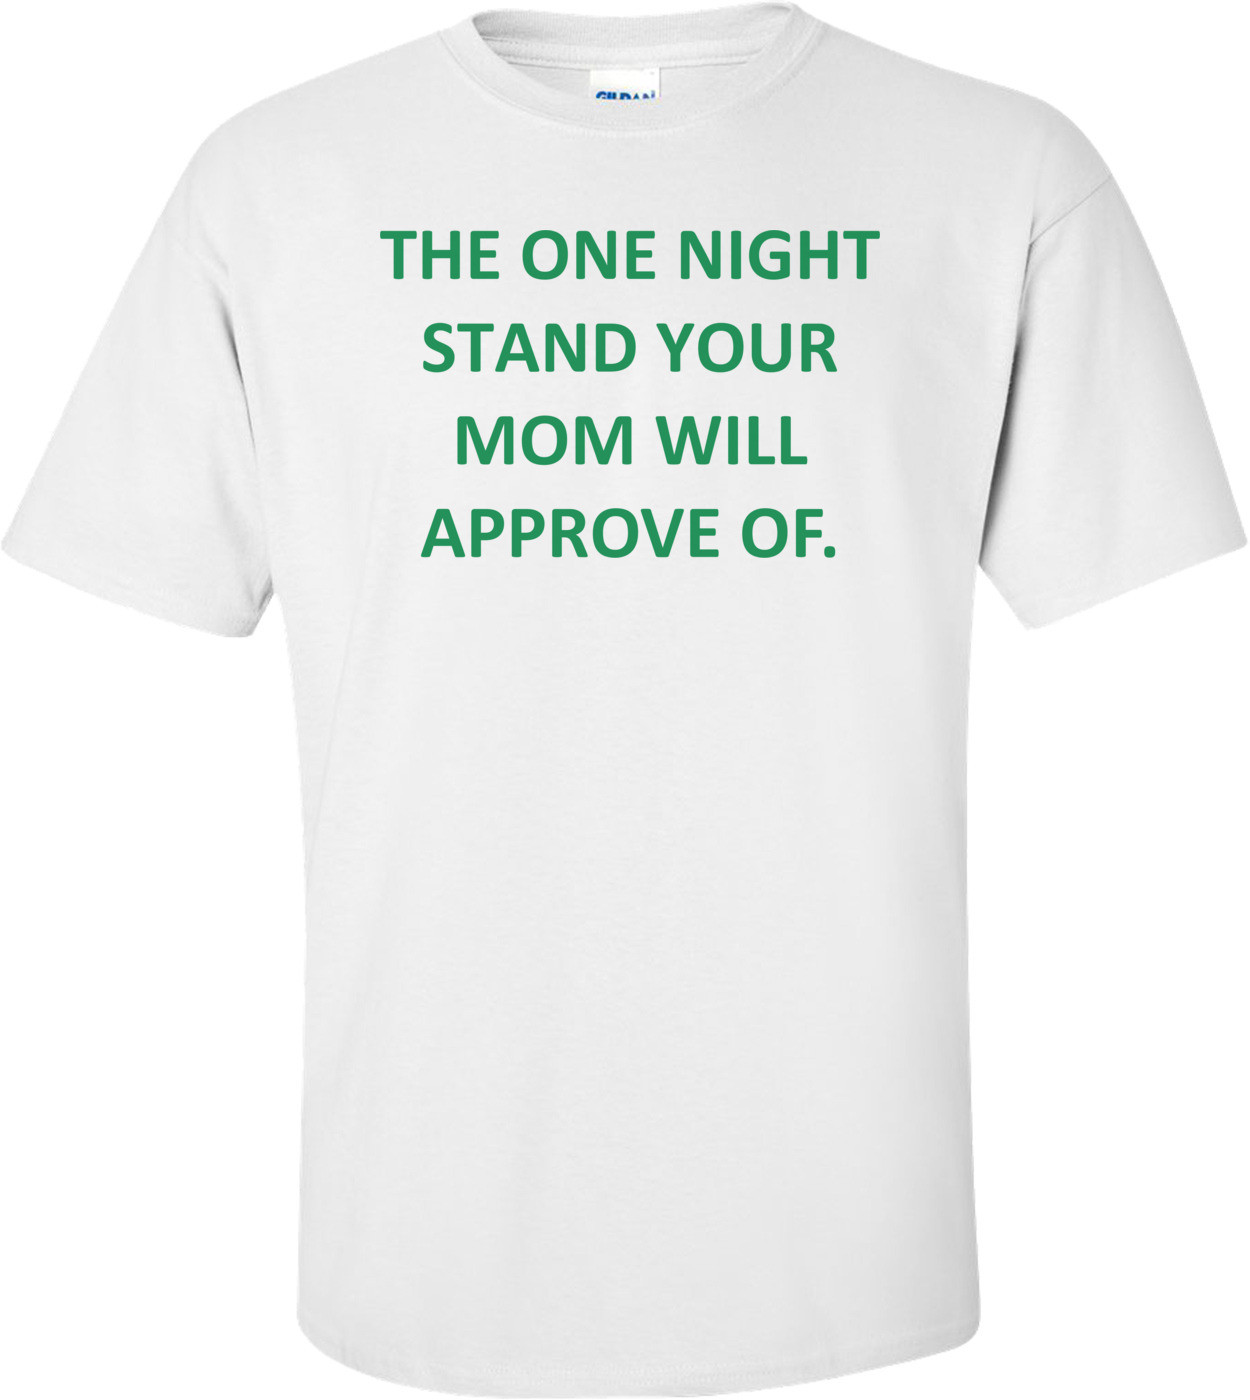 THE ONE NIGHT STAND YOUR MOM WILL APPROVE OF. Shirt